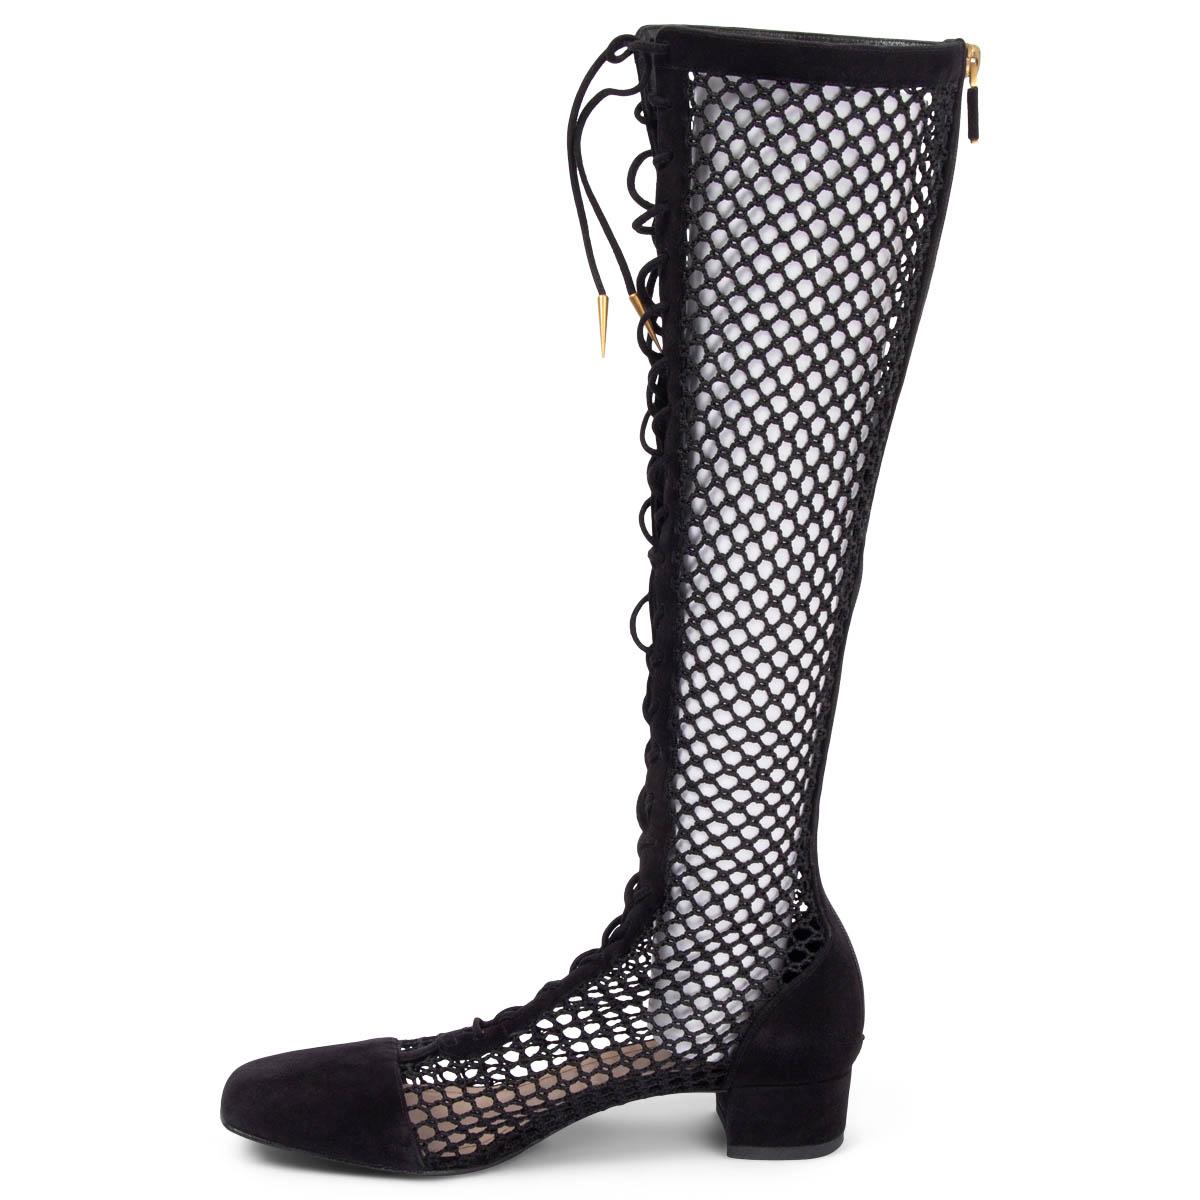 Women's CHRISTIAN DIOR black suede 2018 NAUGHTILY-D FISHNET Boots Shoes 38.5 For Sale